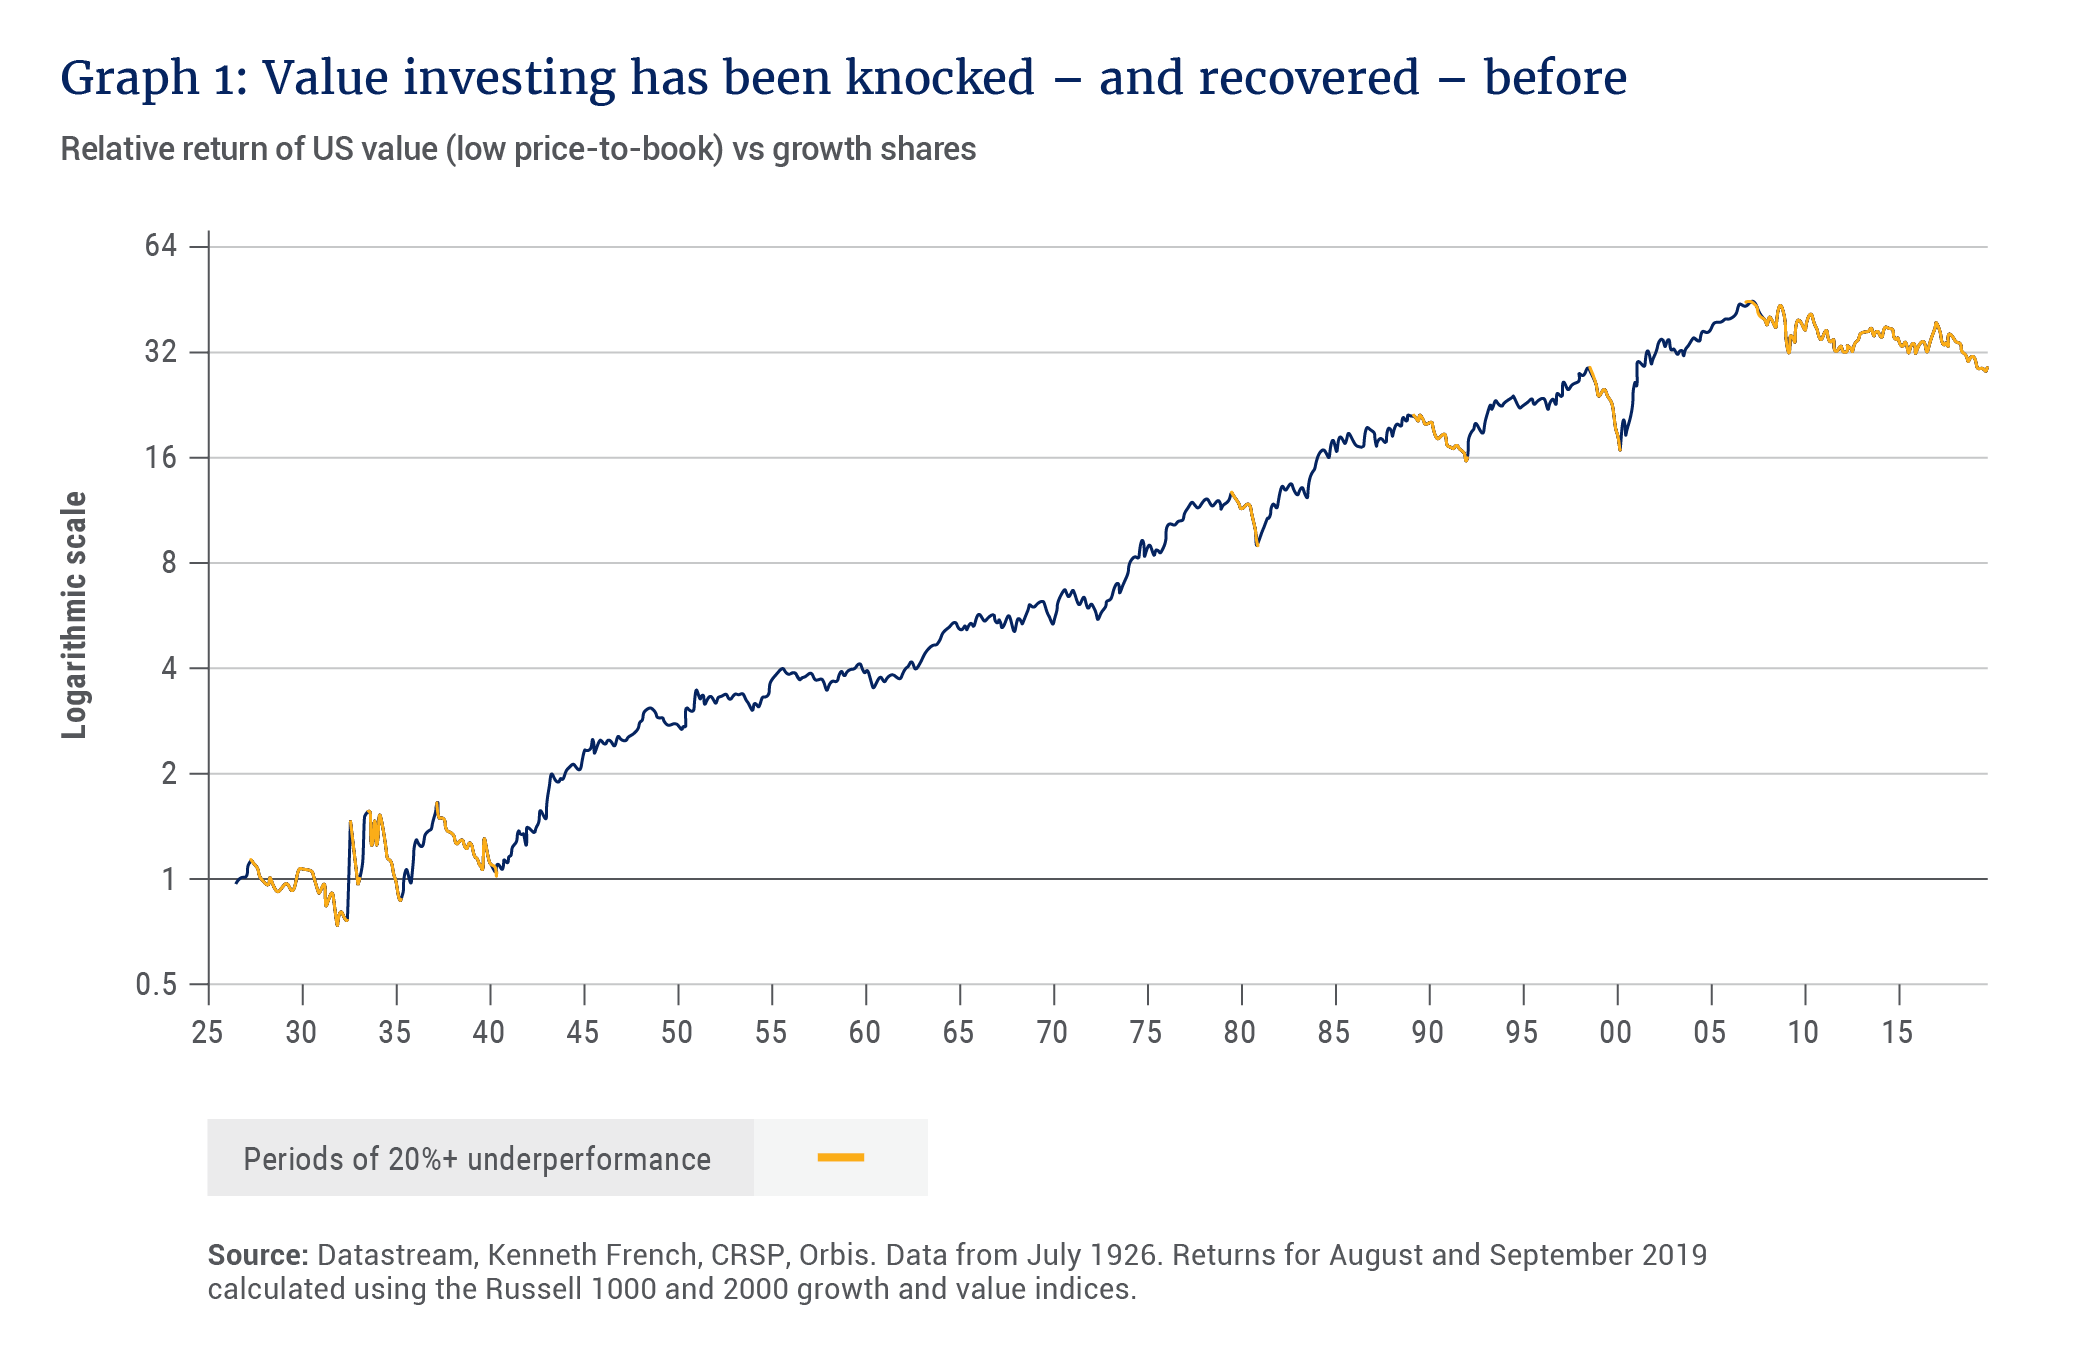 Relative return of US value (low price-to-book) vs growth shares - Allan Gray